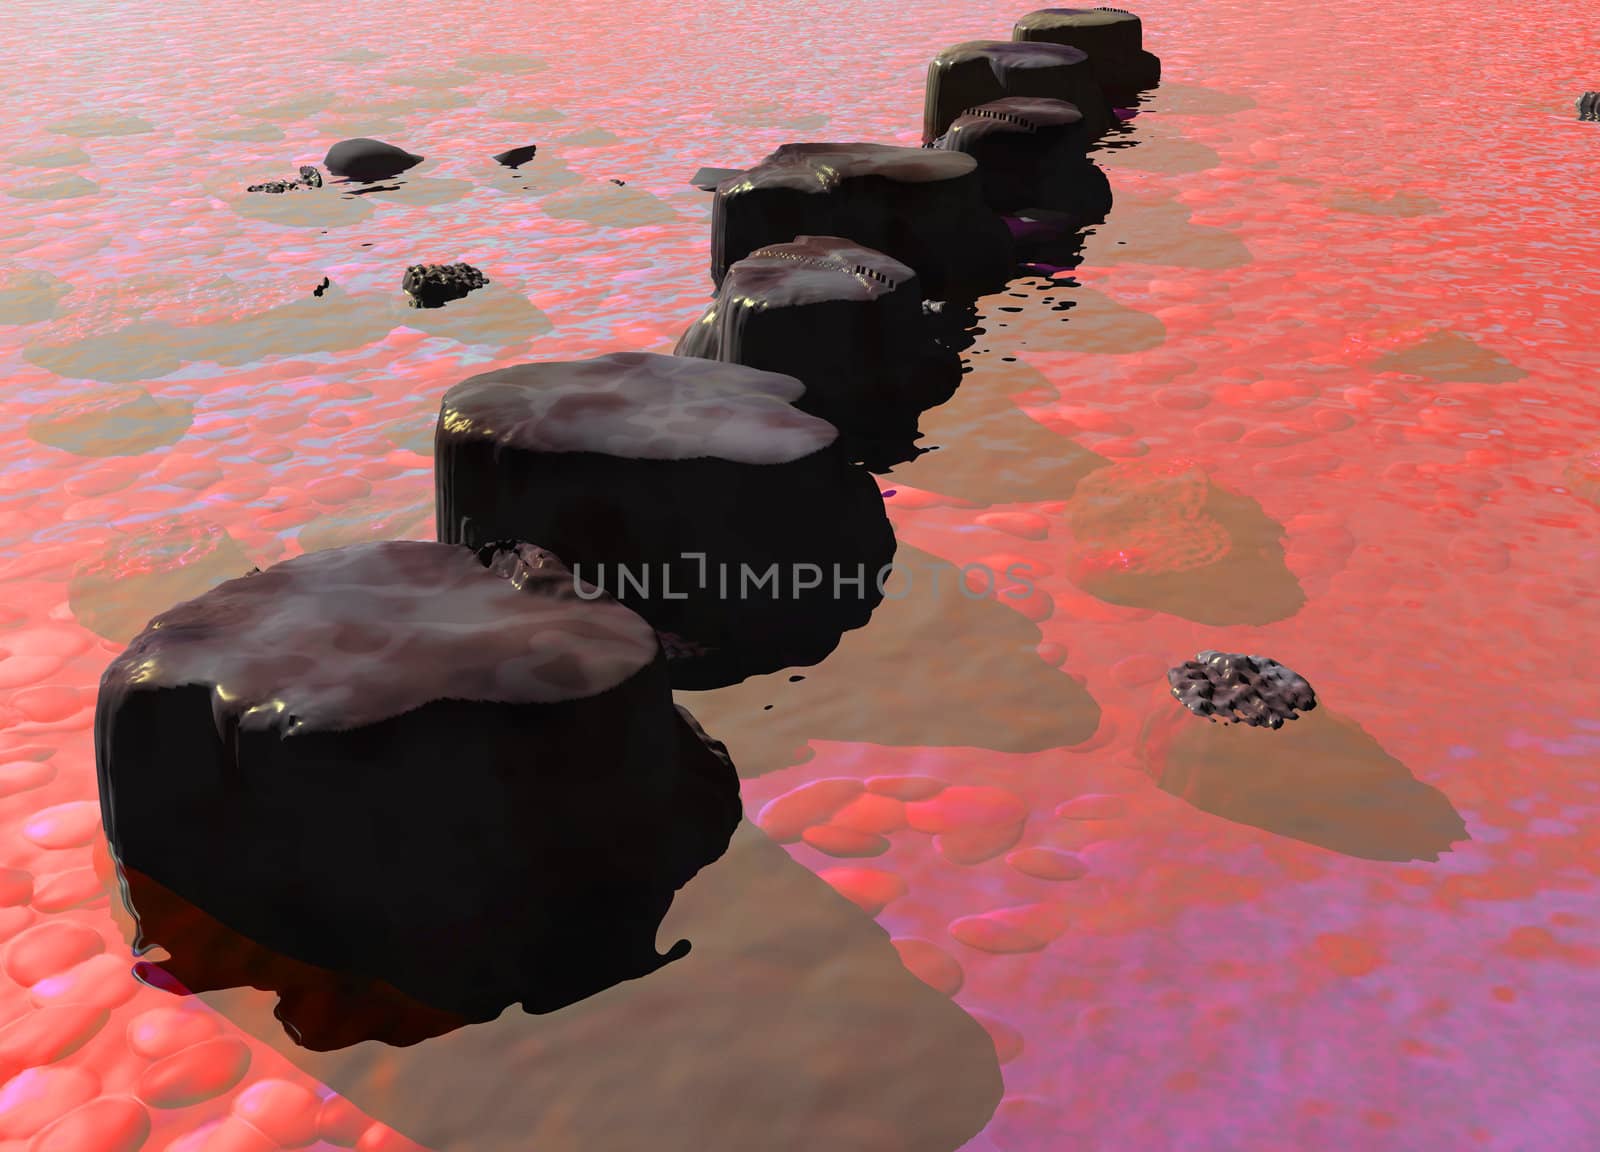 Row of Stepping Stones in a Red Ocean River Scene